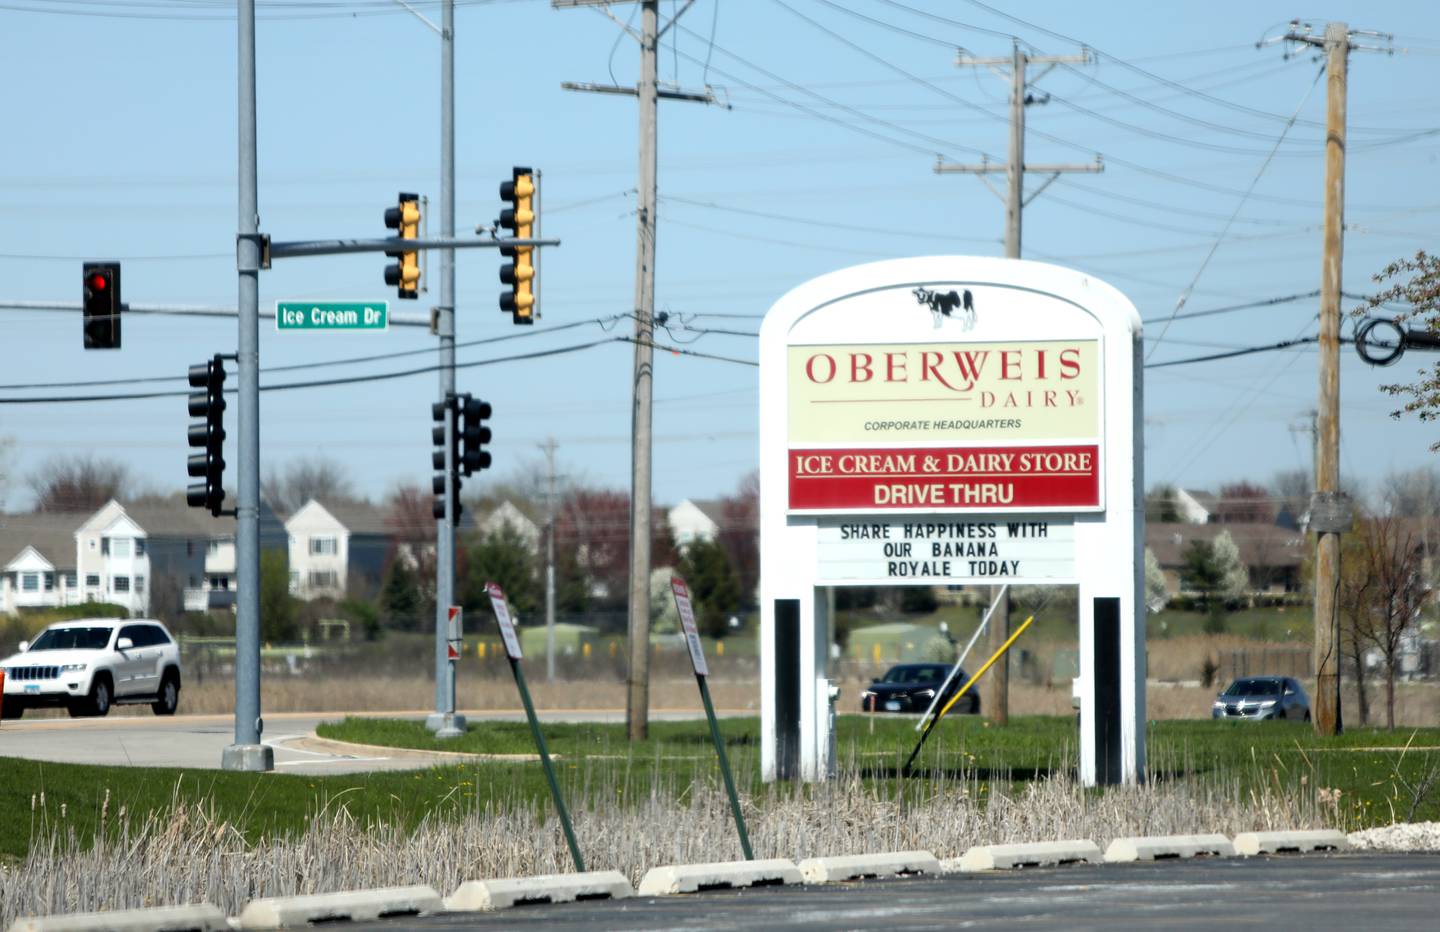 Oberweis Dairy has filed for Chapter 11 bankruptcy protection, according to multiple media reports. The North Aurora-based company filed in the Northern District of Illinois, showing more than $4 million in debt to various creditors.